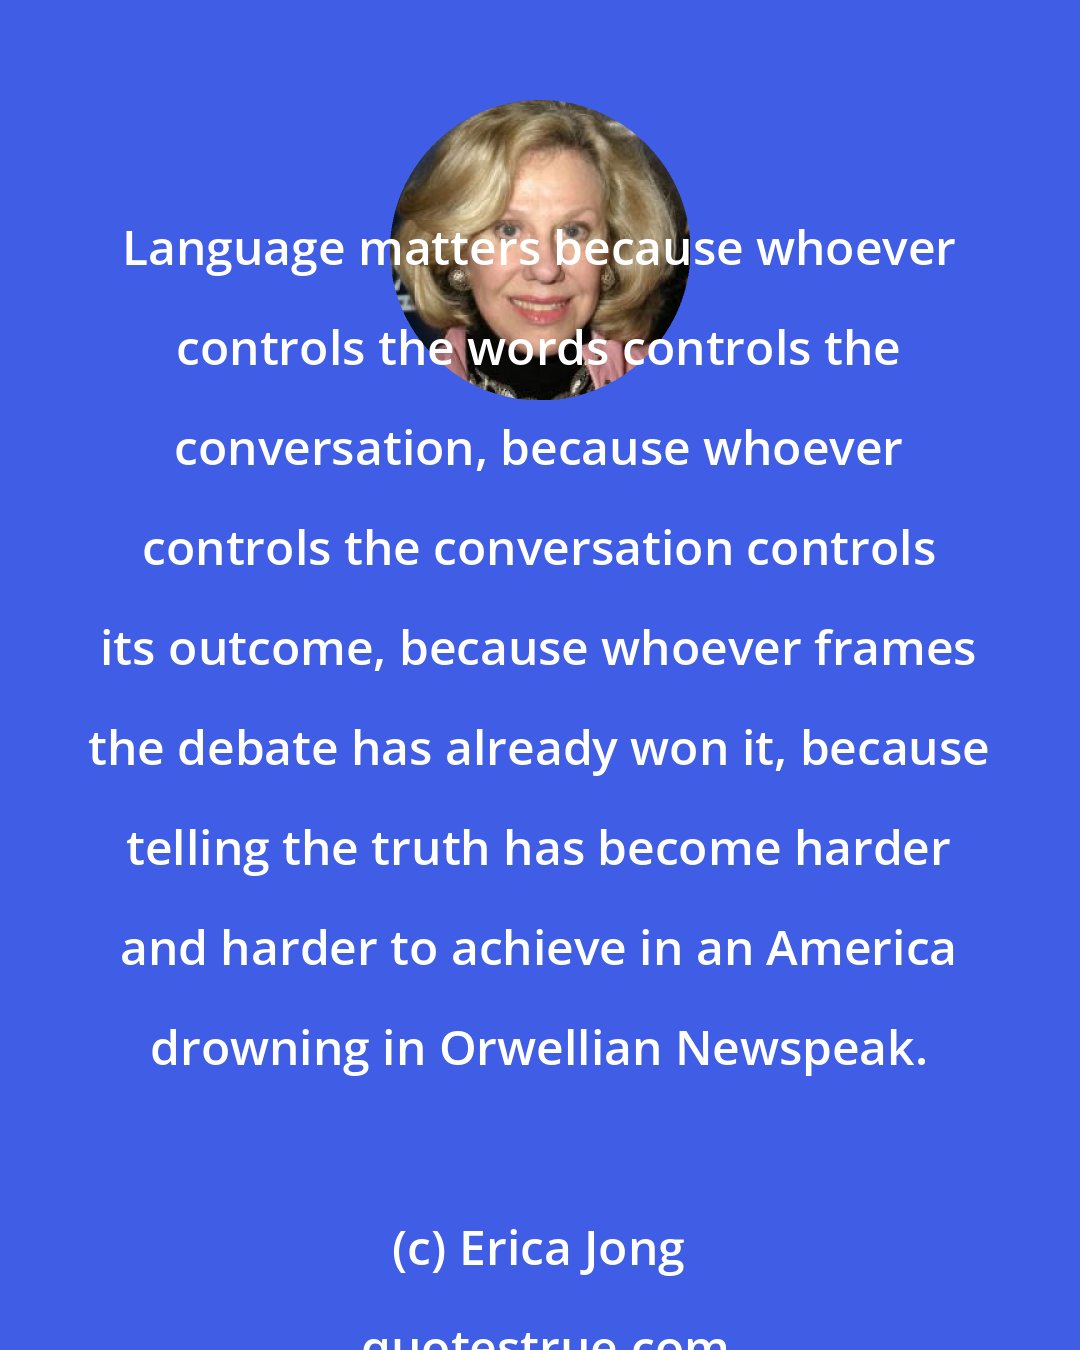 Erica Jong: Language matters because whoever controls the words controls the conversation, because whoever controls the conversation controls its outcome, because whoever frames the debate has already won it, because telling the truth has become harder and harder to achieve in an America drowning in Orwellian Newspeak.